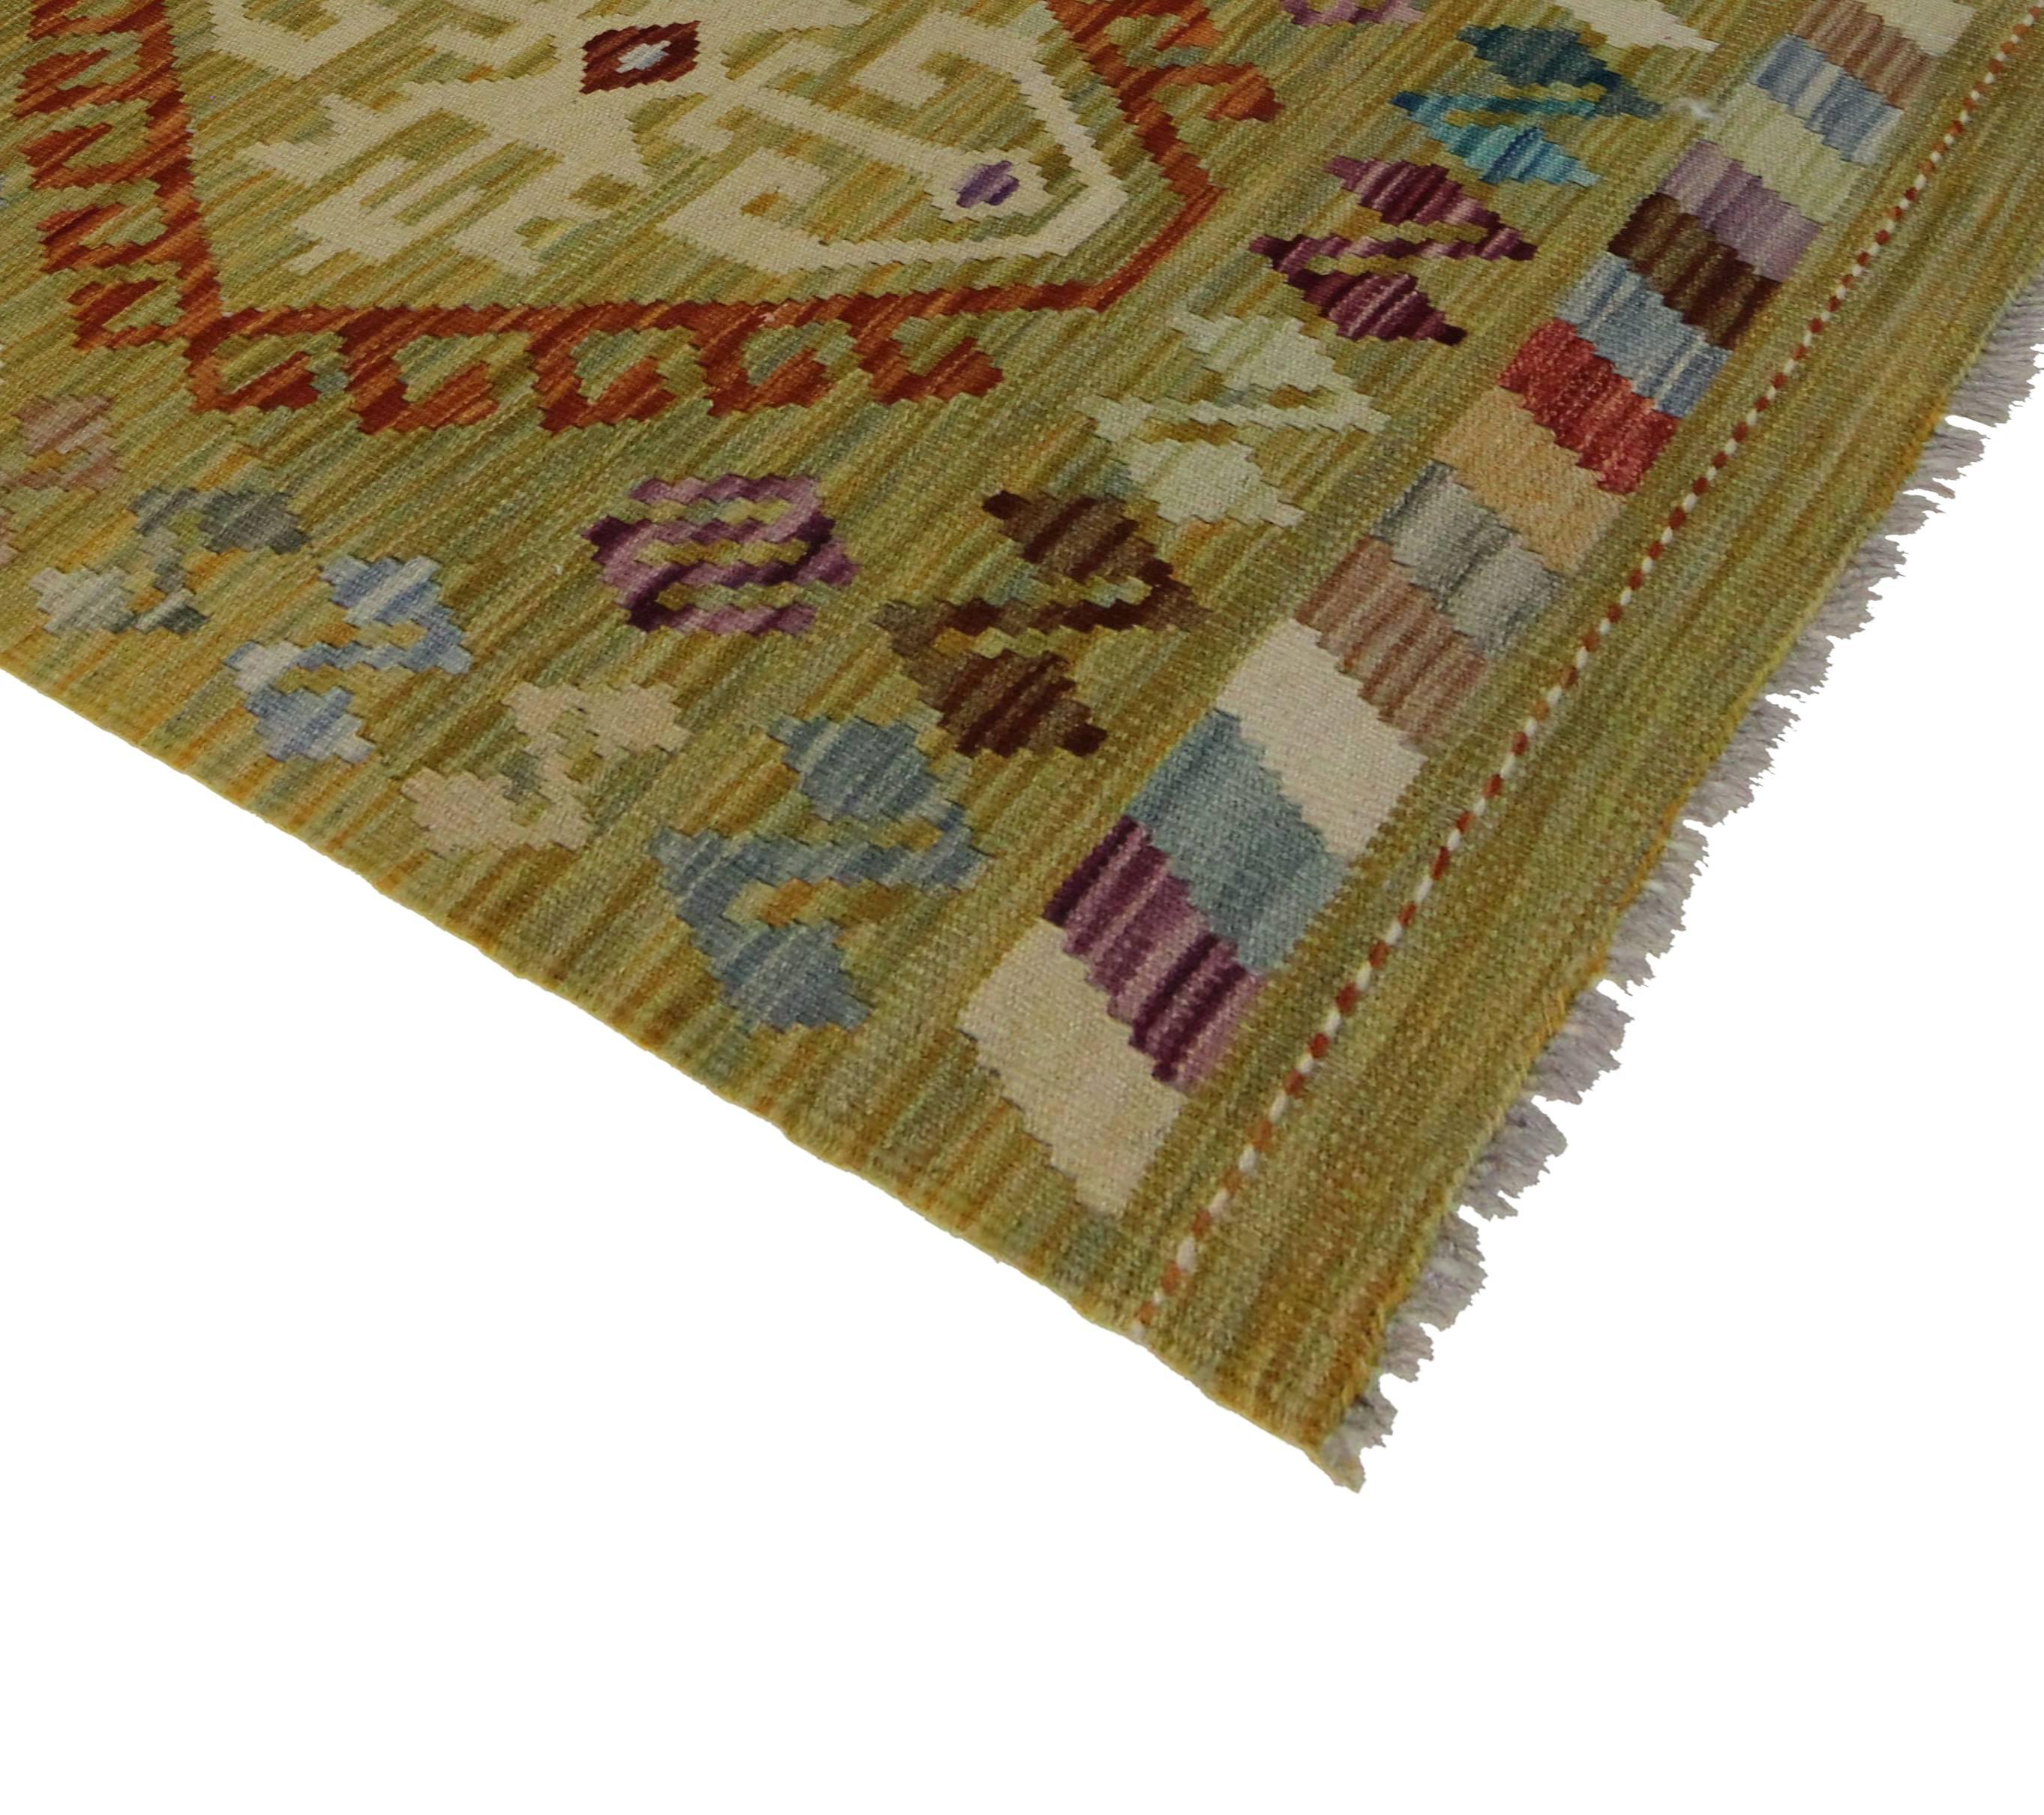 This charismatic modern Afghani Tribal Kilim rug with Boho Chic style is anything but boring. This handwoven wool flat-weave Kilim rug features an all-over geometric and tribal pattern in a vibrant color palette. Blending the graphic appeal and Folk